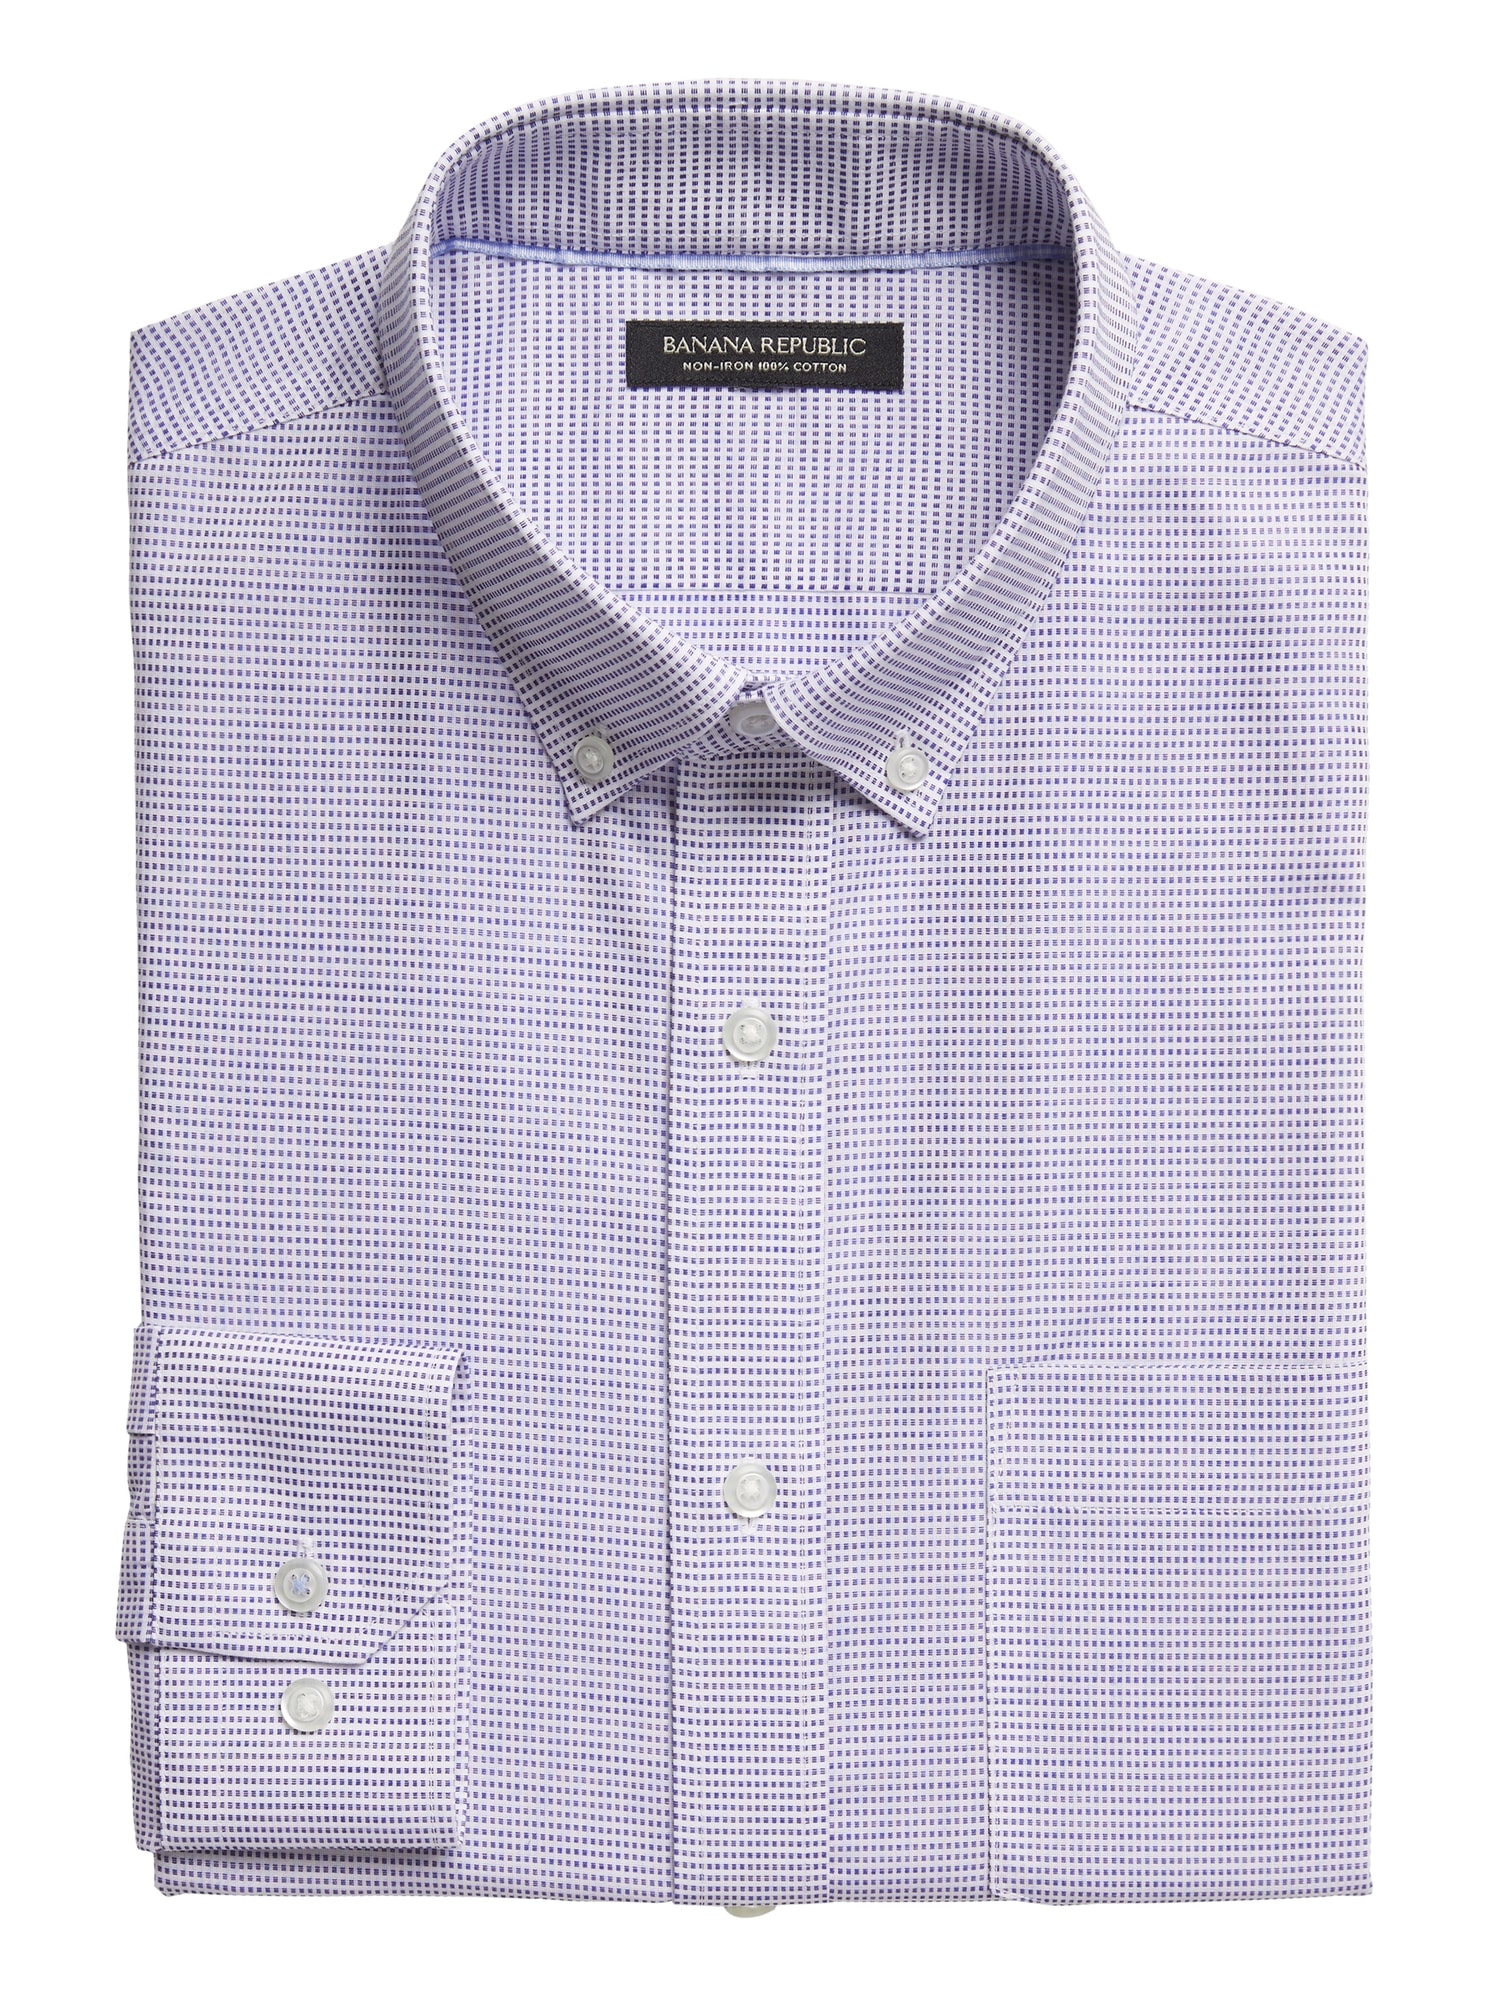 Slim-Fit Non-Iron Dress Shirt with Button-Down Collar